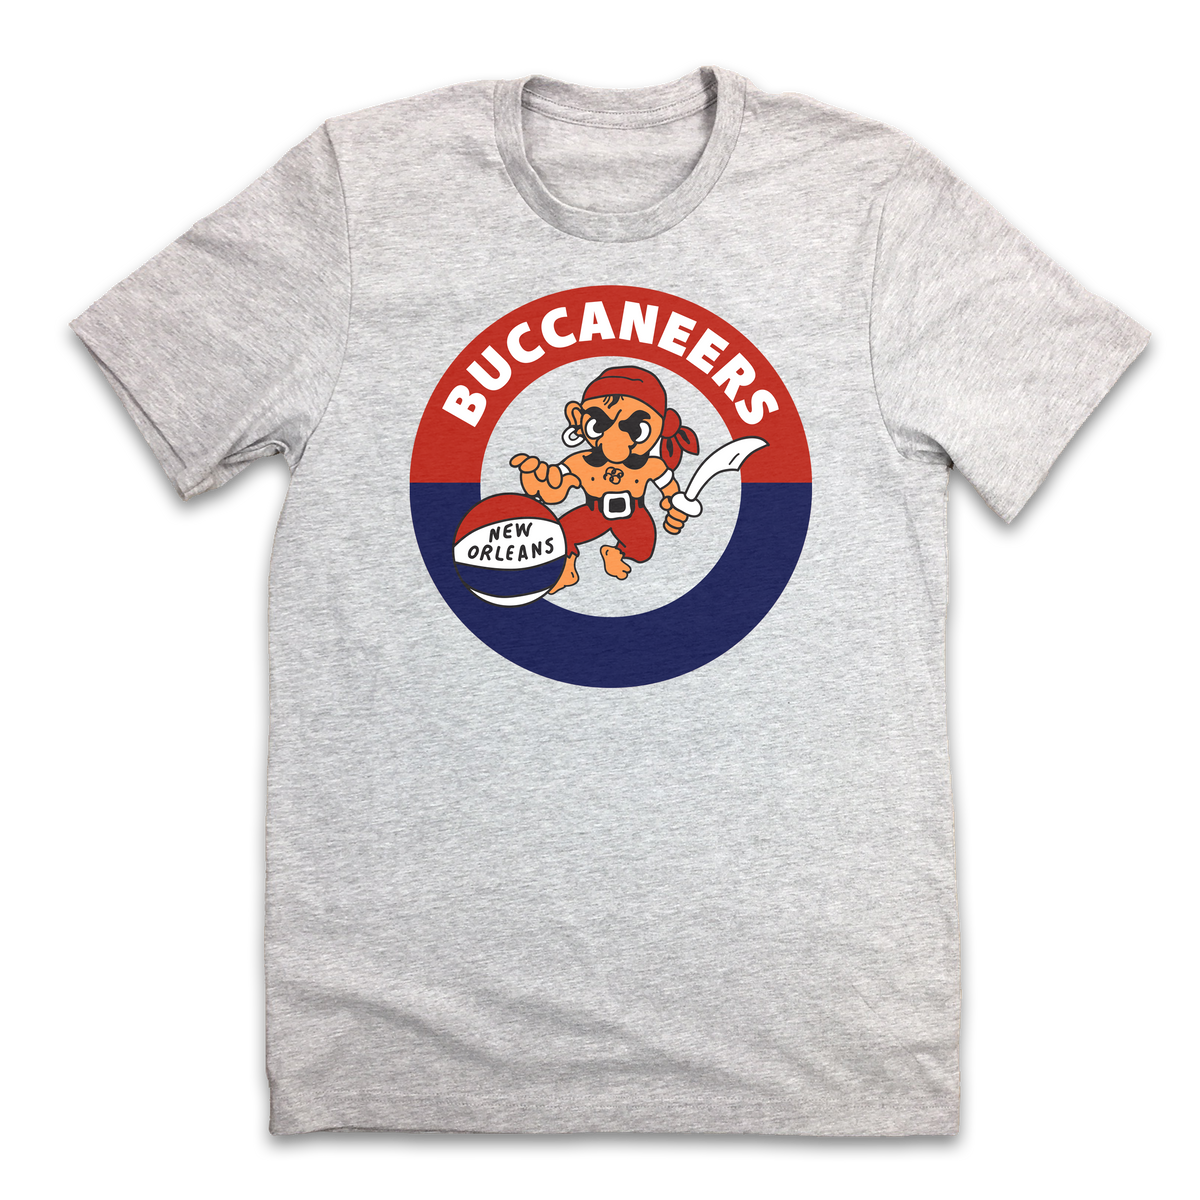 New Orleans Buccaneers - In The Clutch- Retro Sports T Shirts